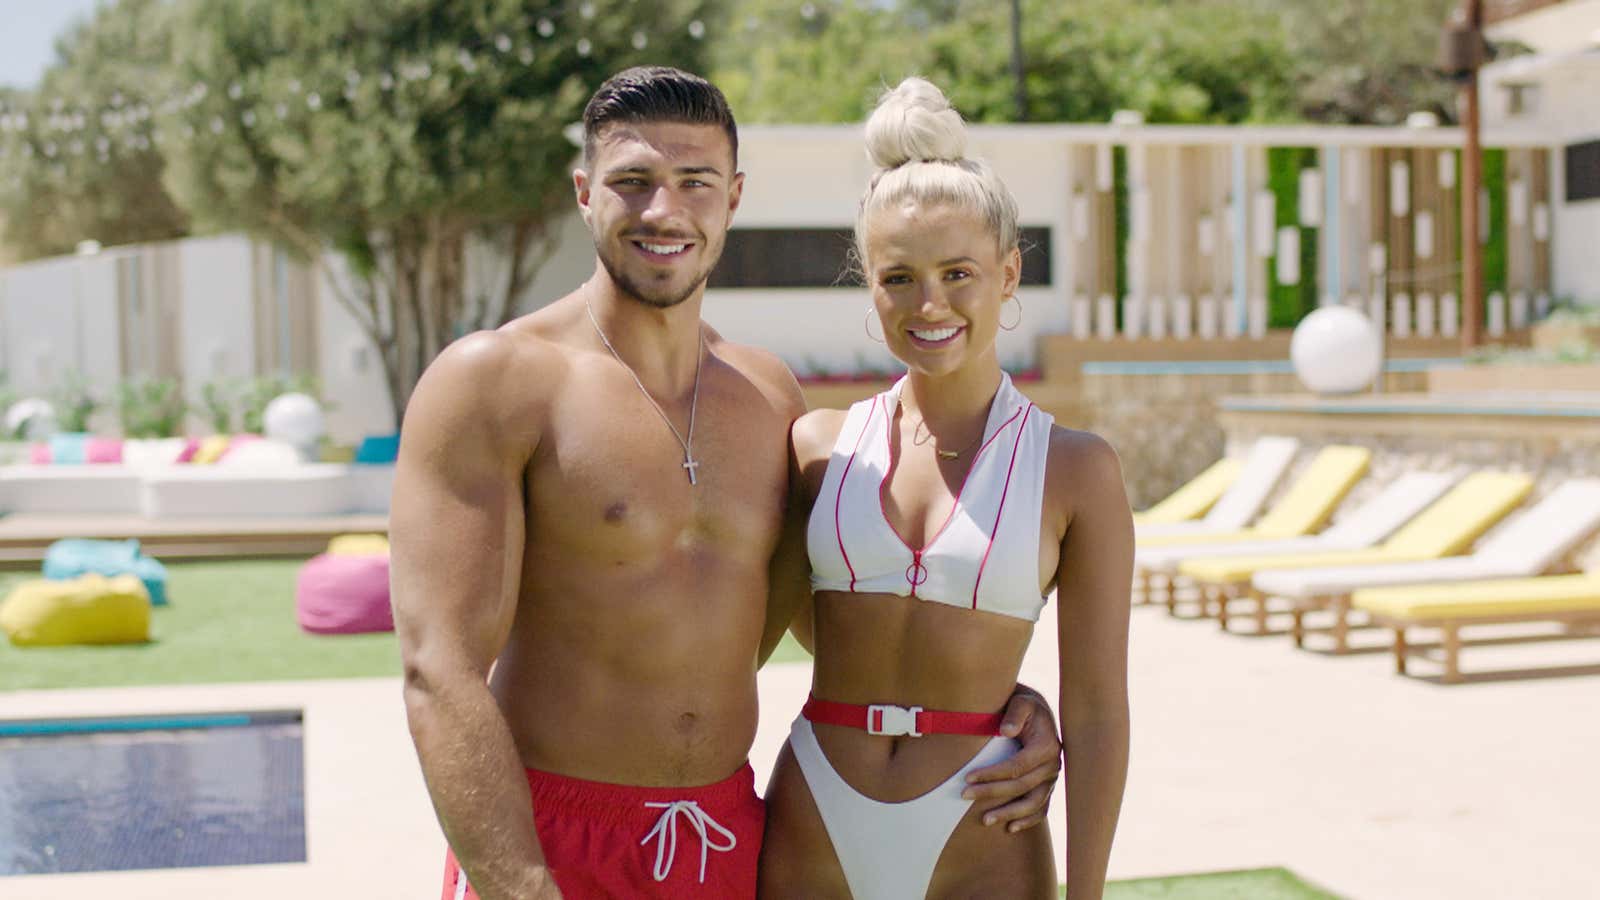 “Love Island” promotes a “type” which works along worryingly aesthetic lines.